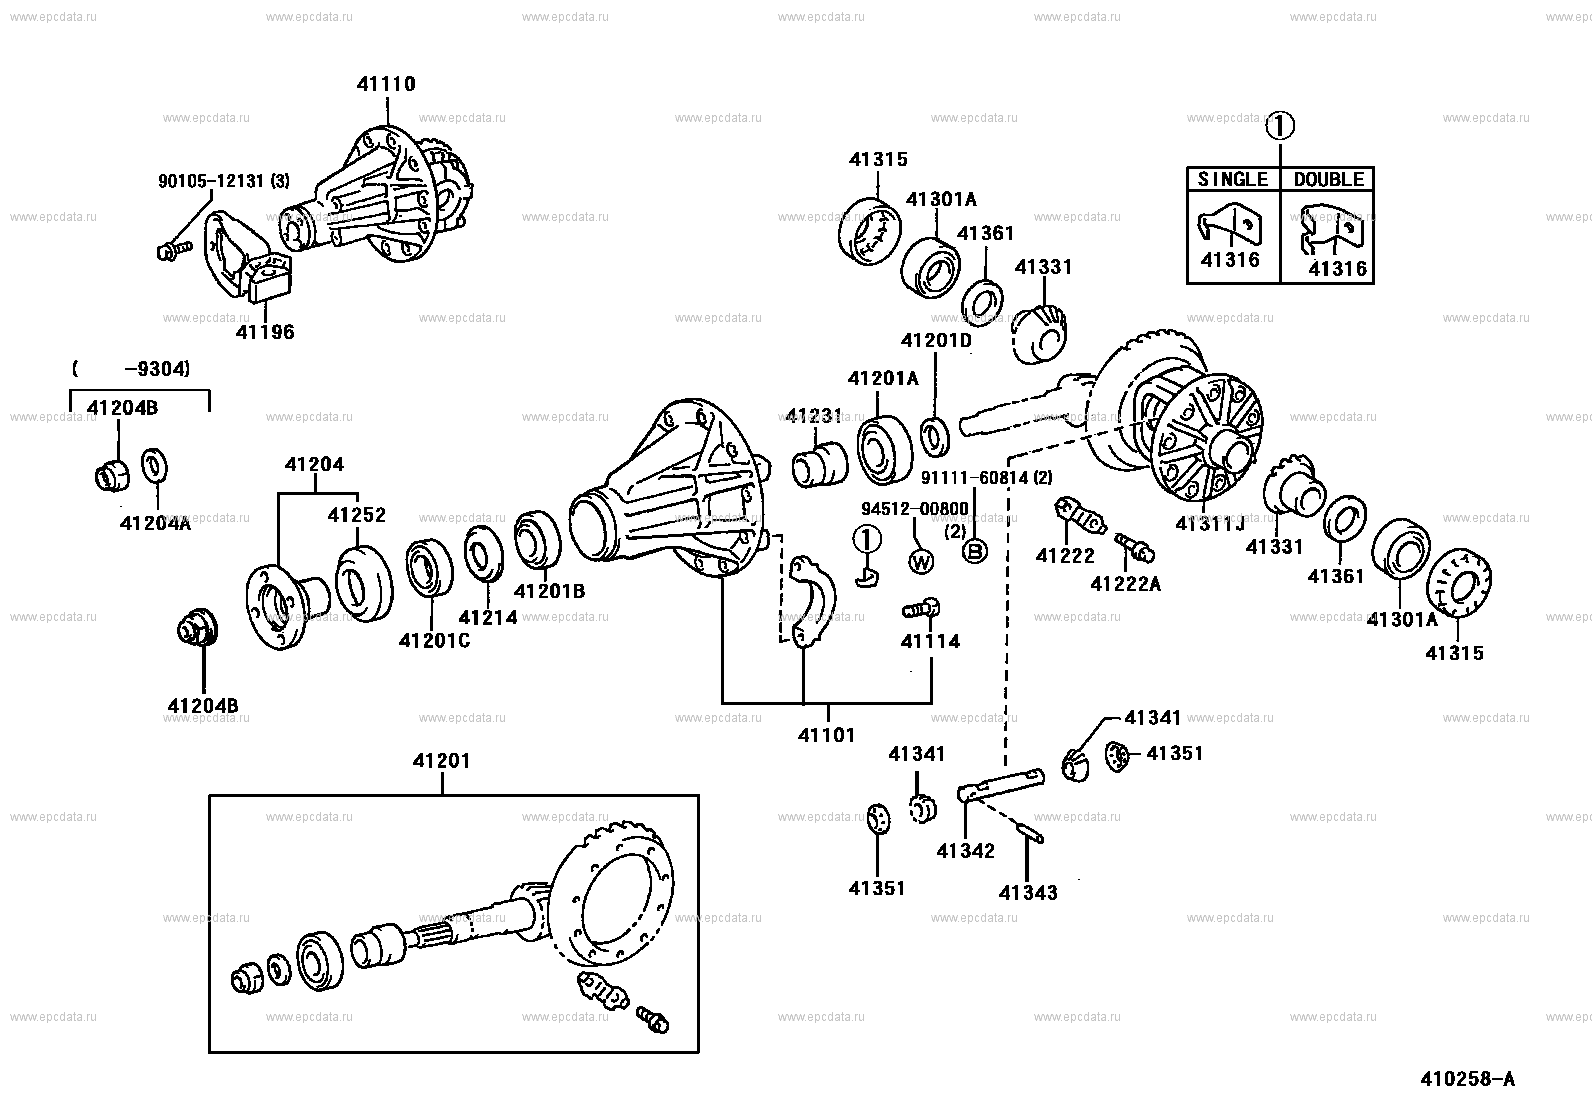 REAR AXLE HOUSING & DIFFERENTIAL